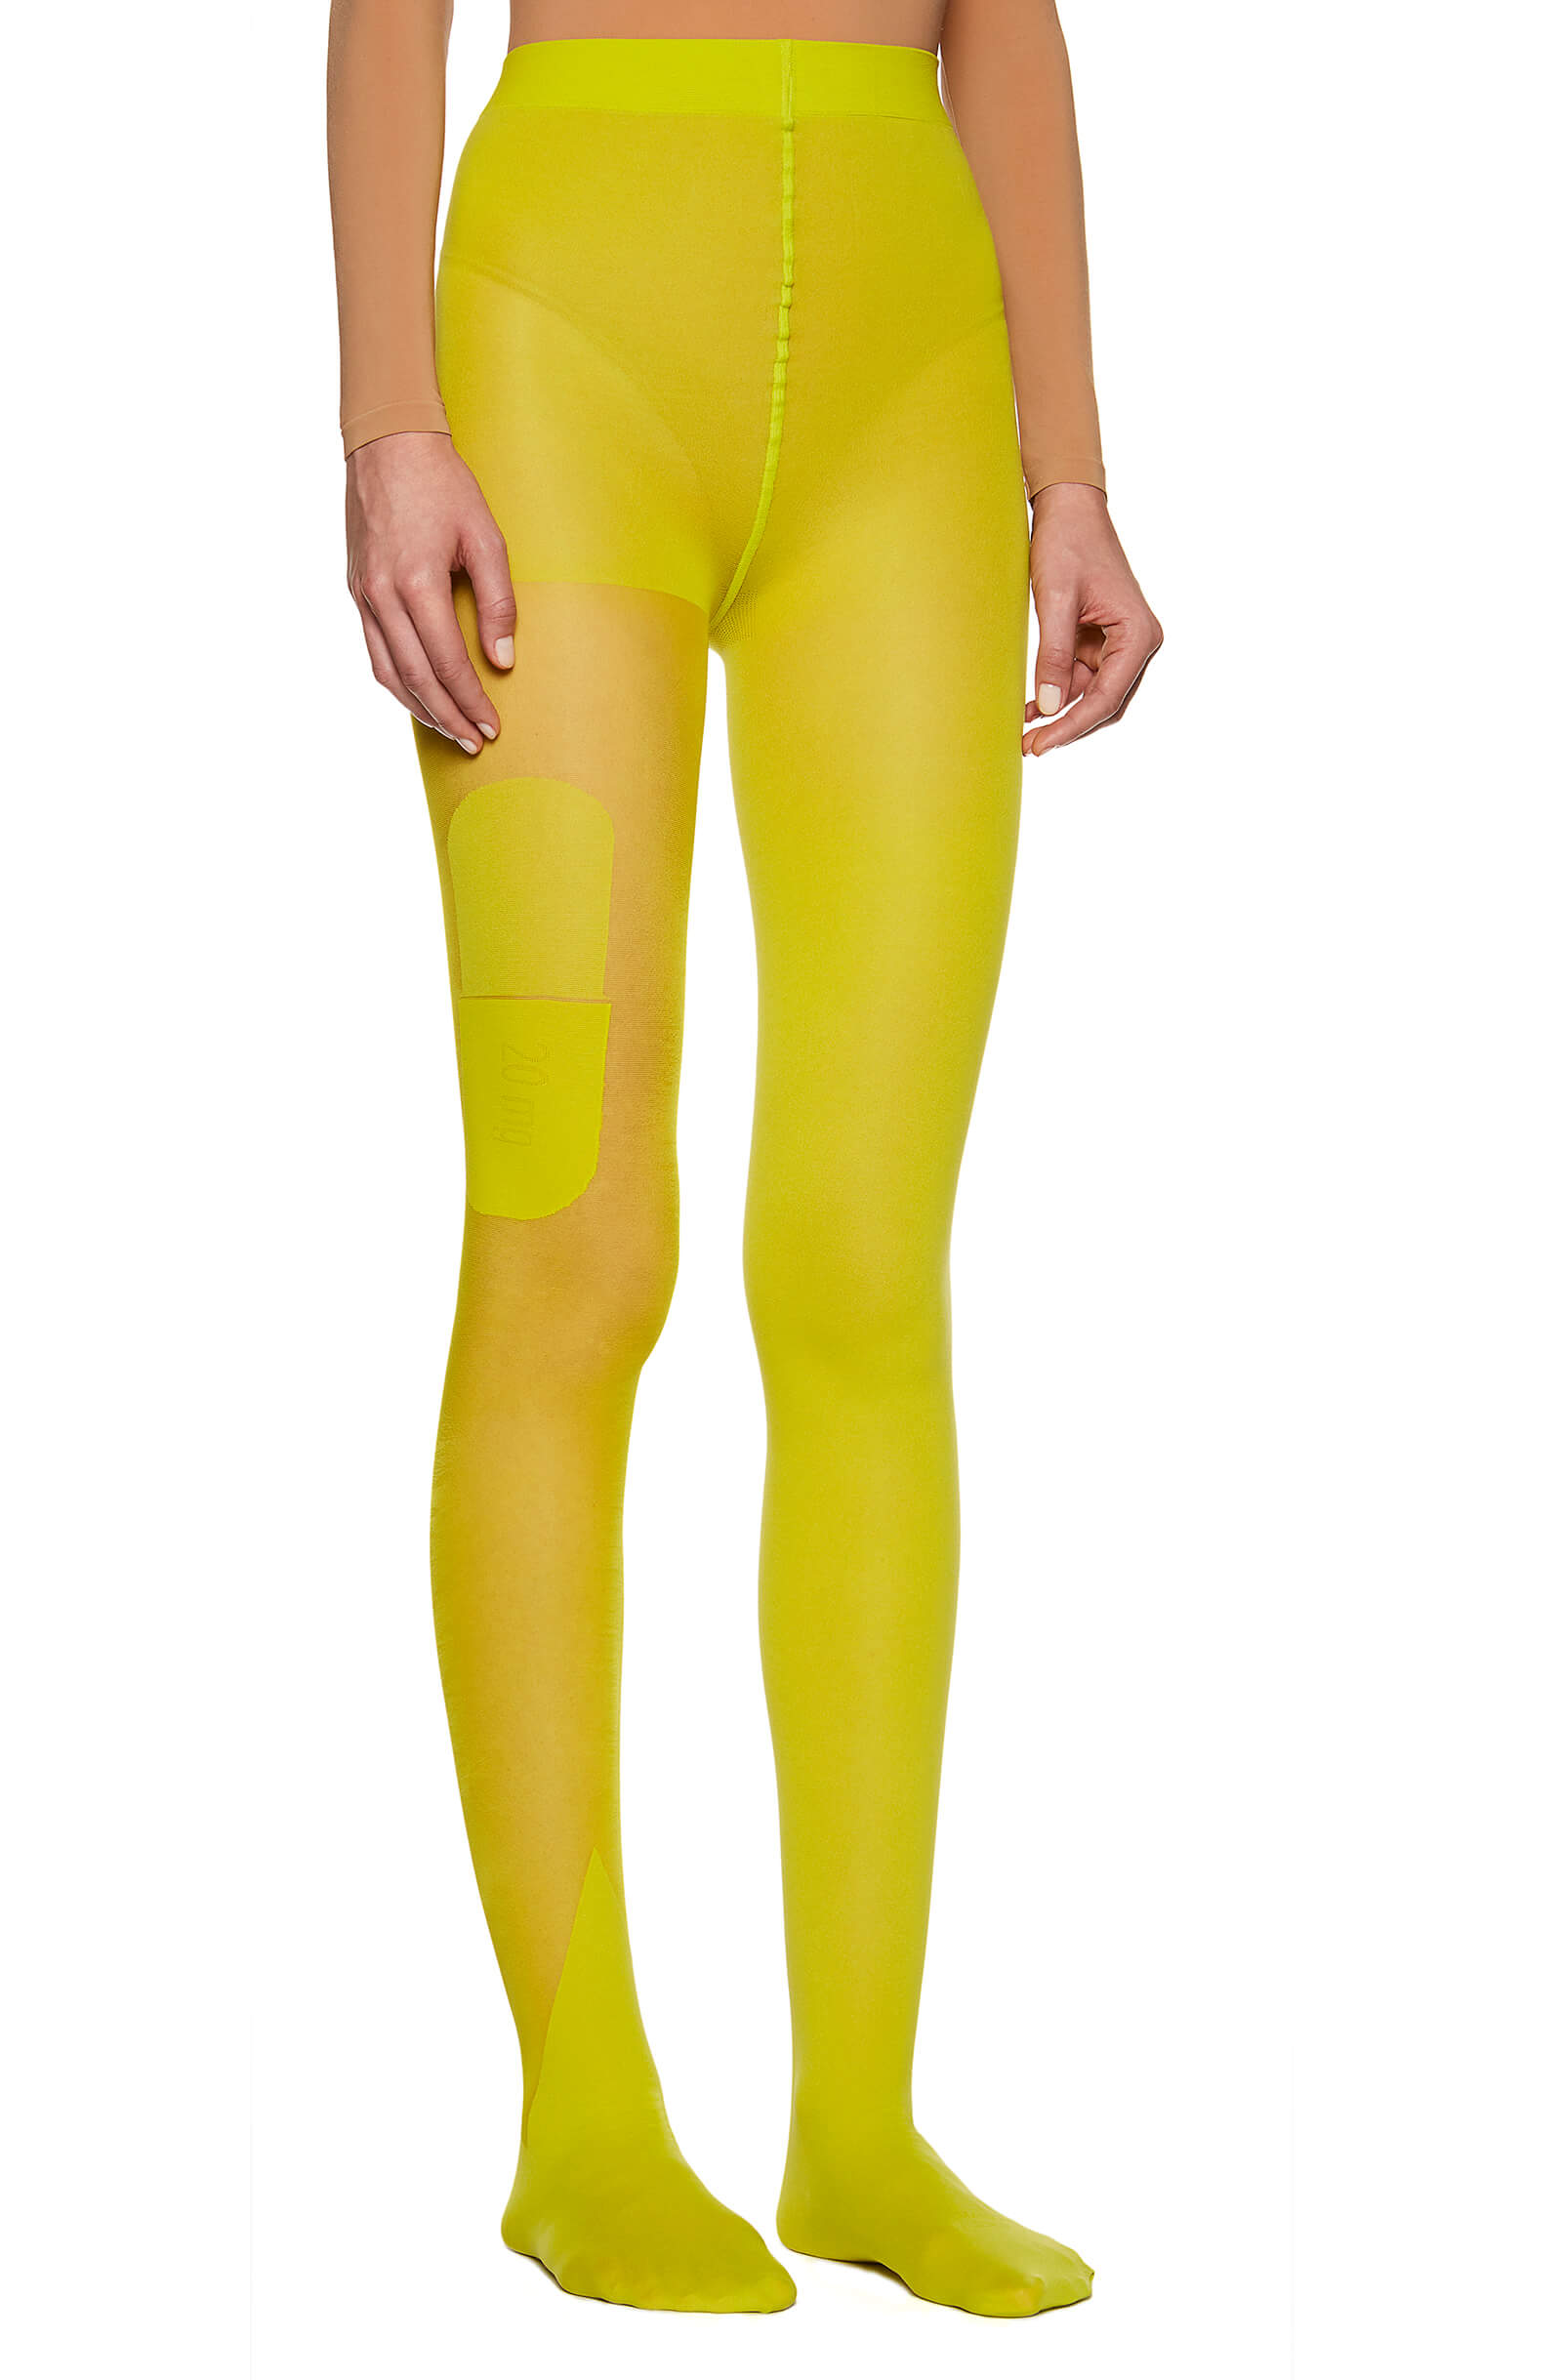  Yellow Footless Tights - Adult (Pack of 1) - Soft